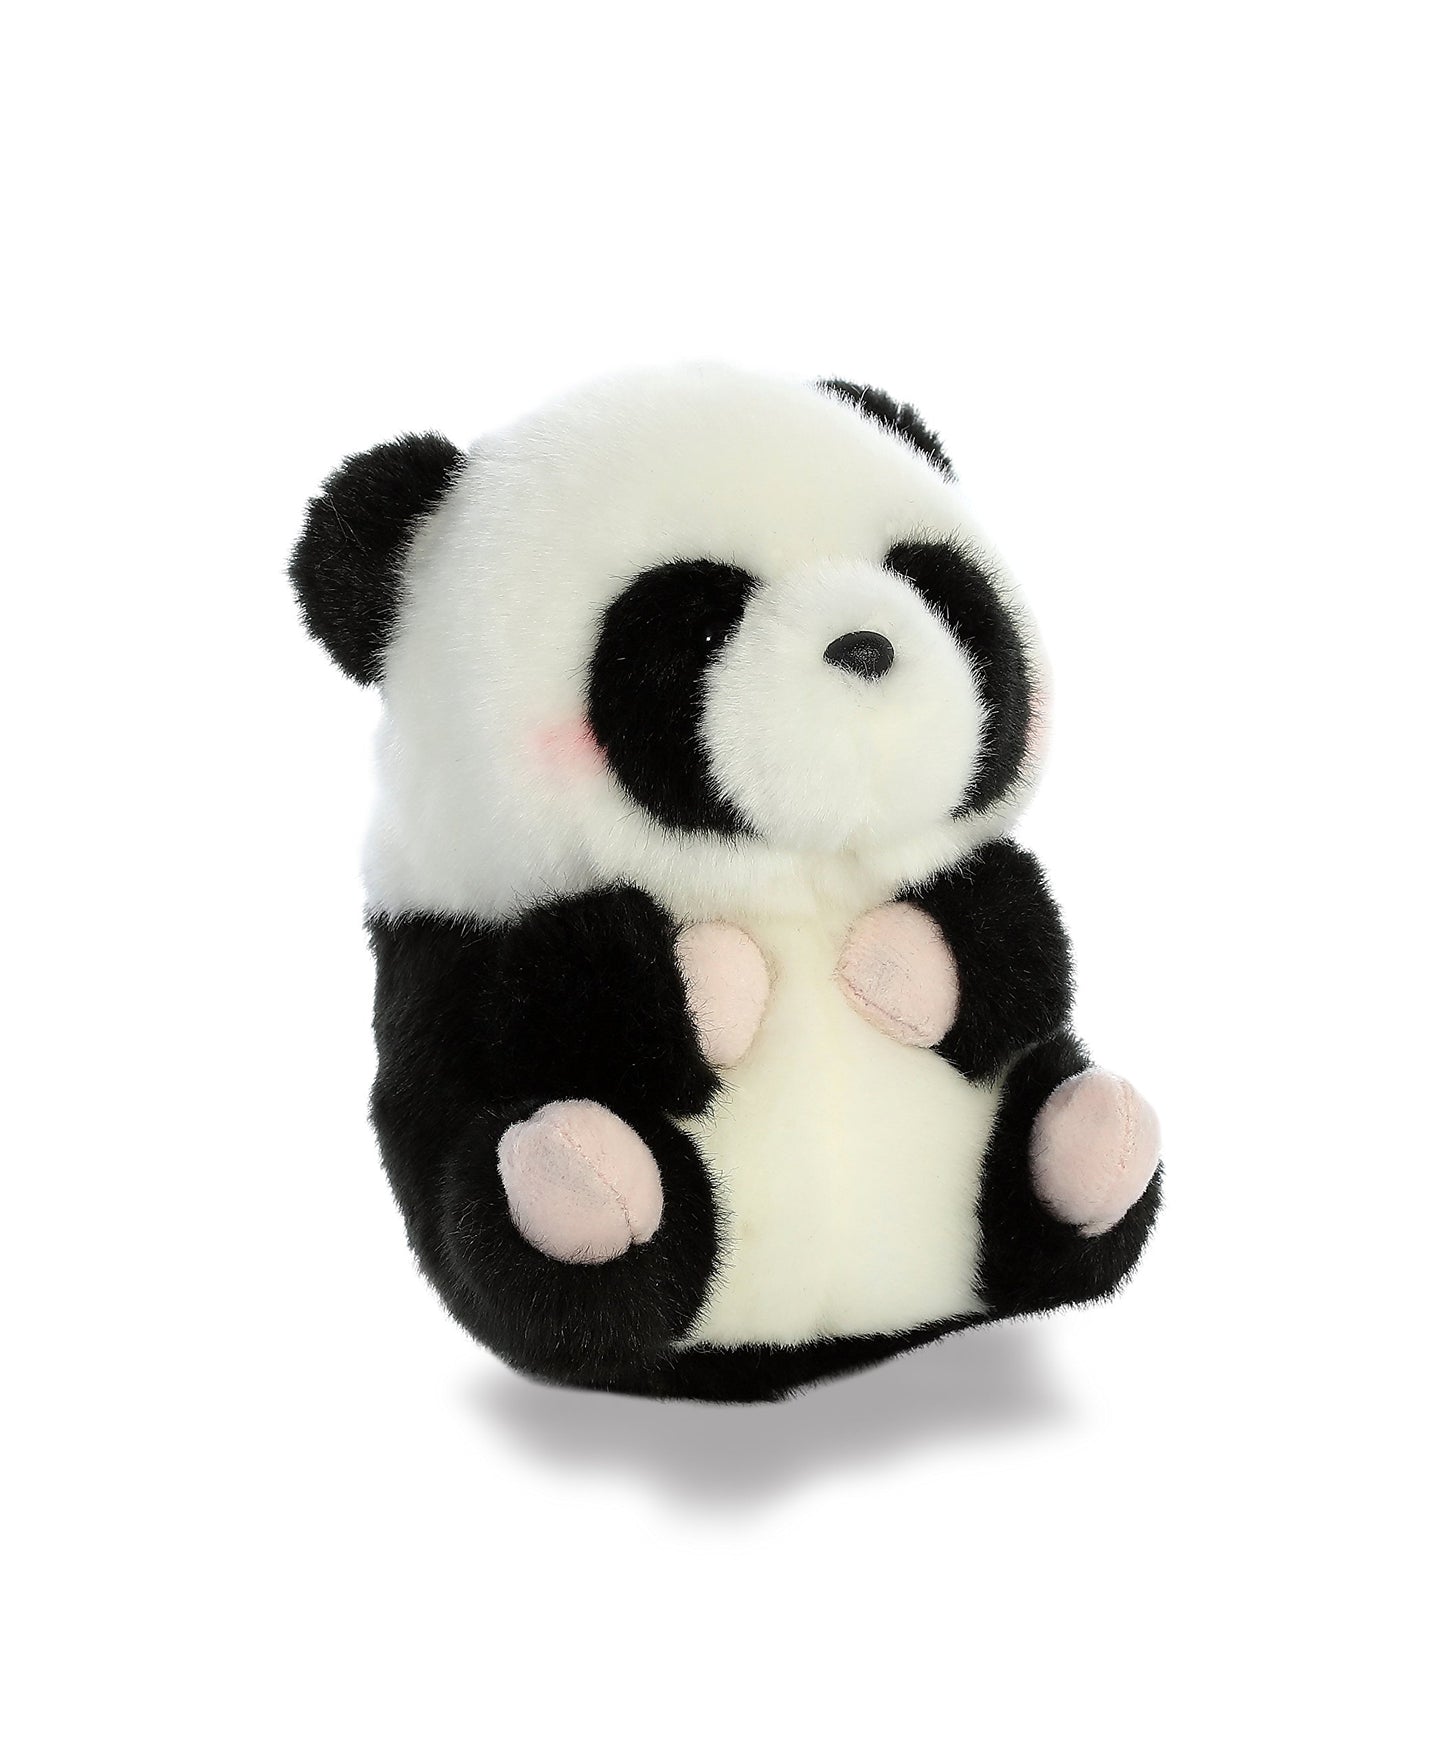 Round Rolly Pet Precious Panda Stuffed Animal - Your Adorable On-The-Go Companion for Fun